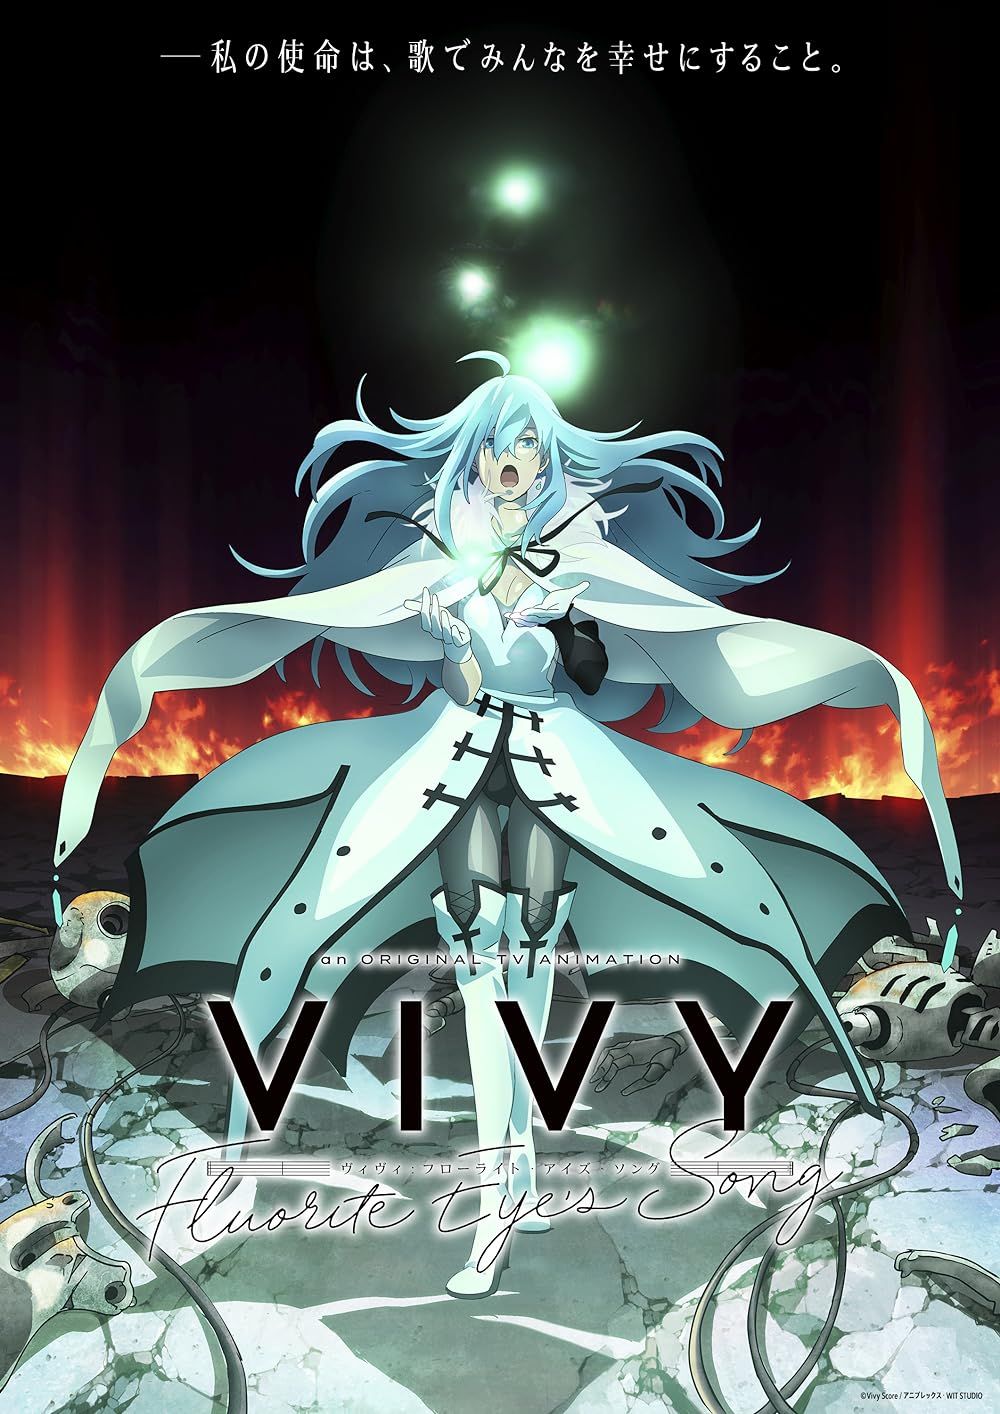 Vivy Sings with Lights Among the Wreckage in Vivy Fluorite Eye's Song